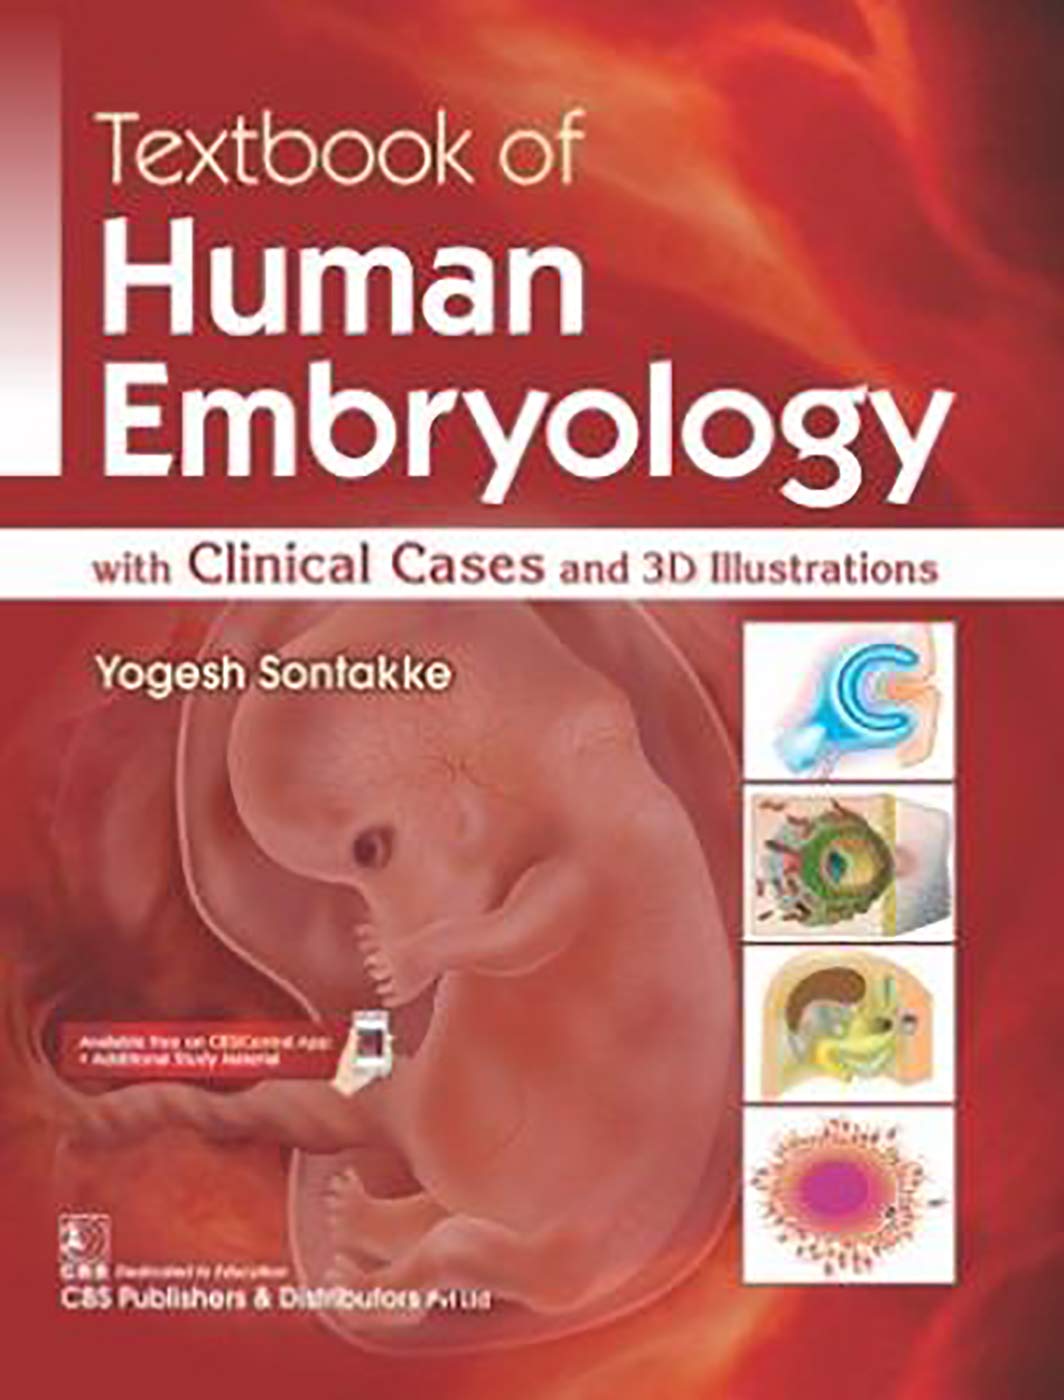 Textbook Of Human Embryology With Clinical Cases And 3D Illustrations